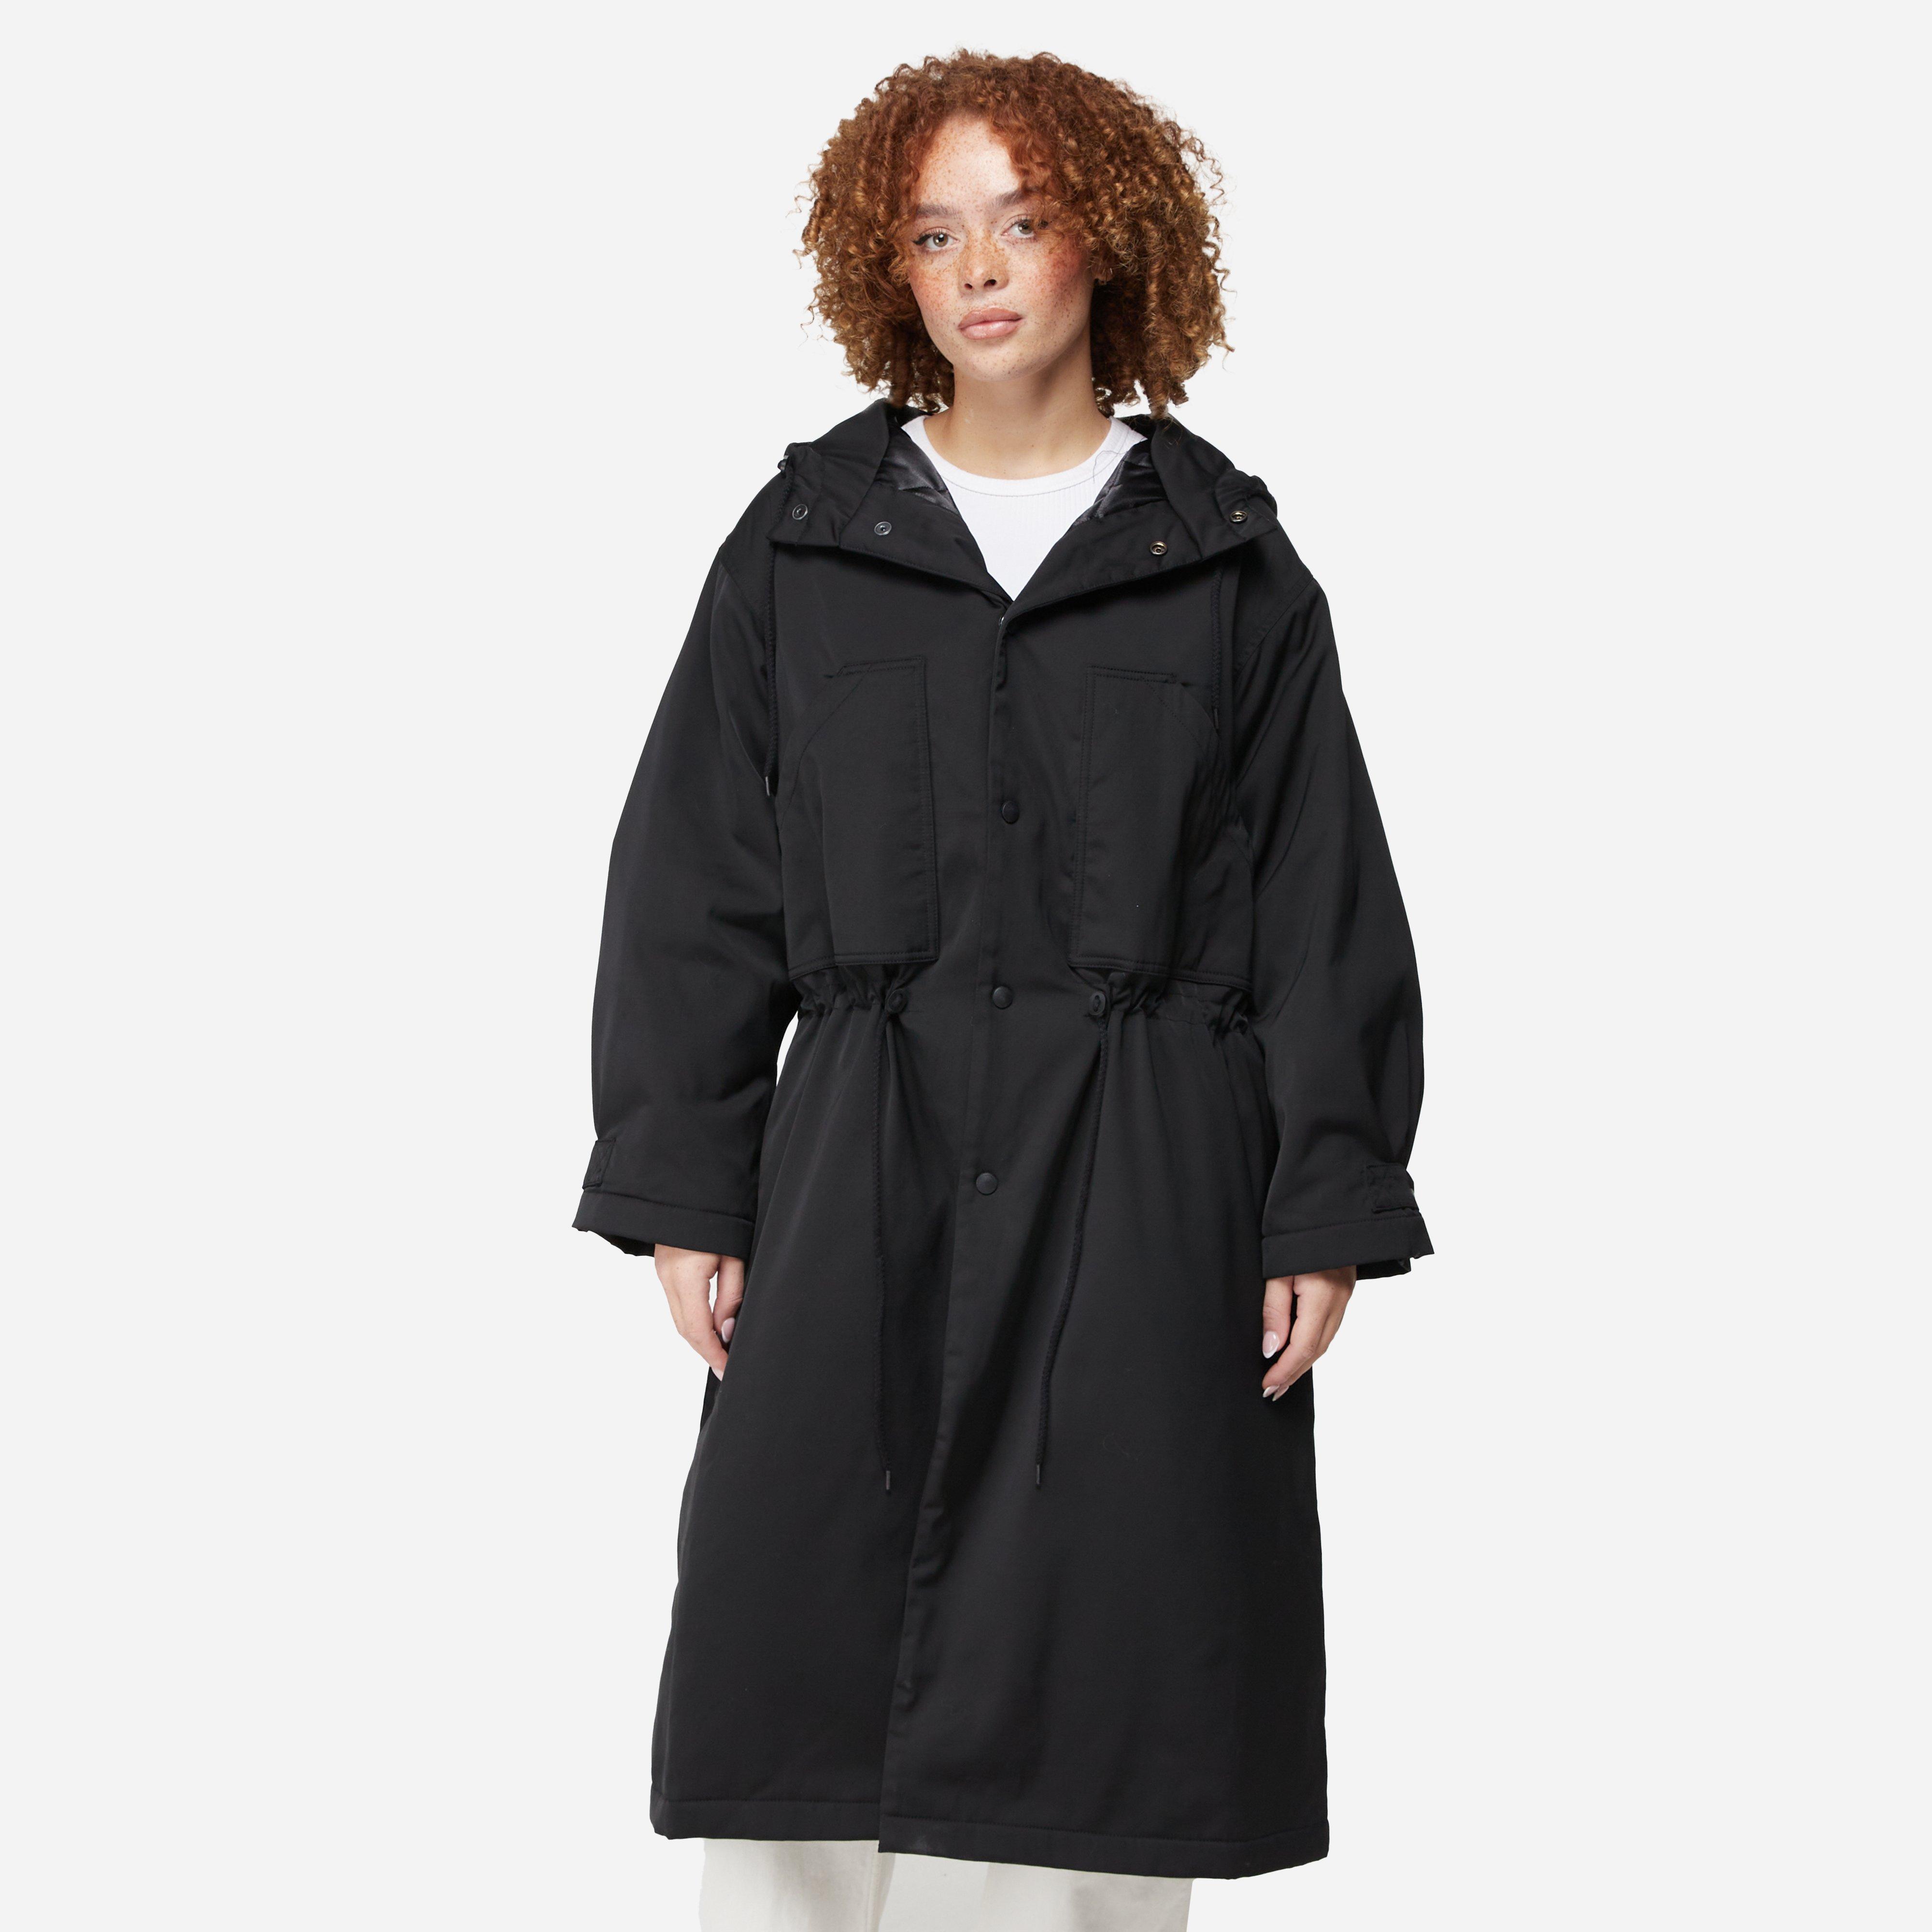 Girls of Dust Sailor Trench